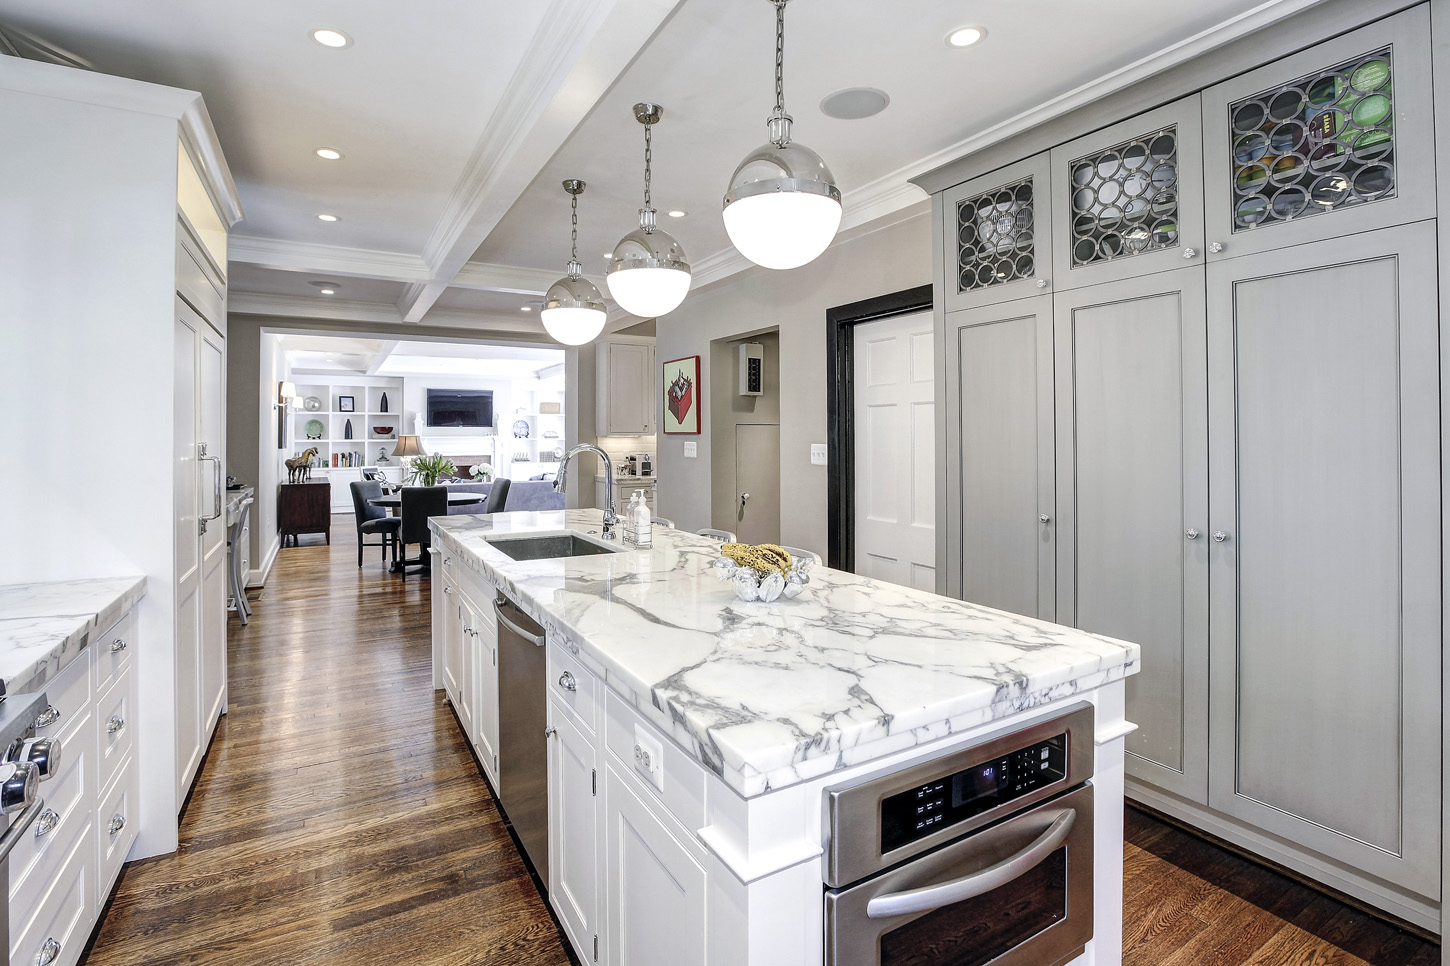 A view of the kitchen of the Obamas' new home. (Courtesy McFadden Group)